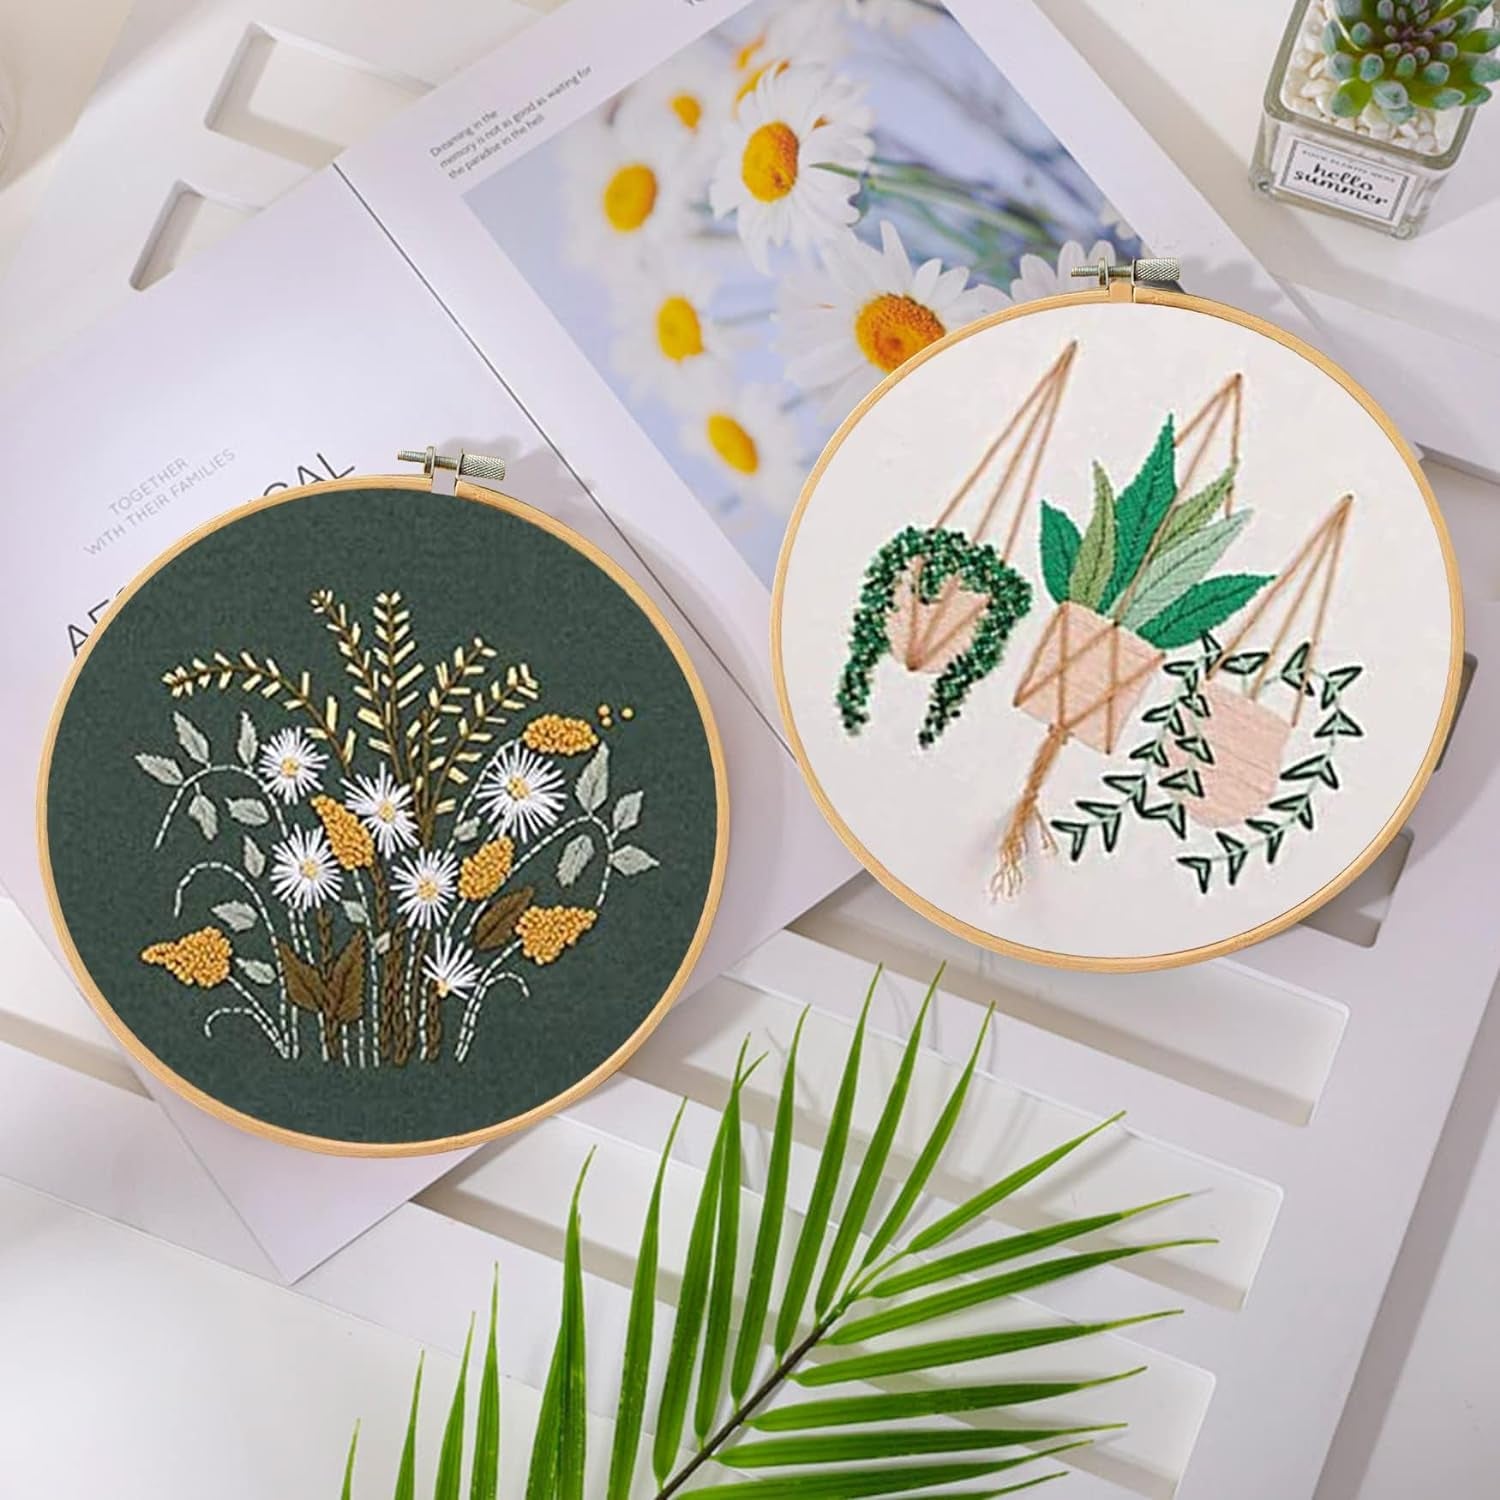 3 Sets Embroidery Kit for Beginners Needlepoint Cross Stitch Kits for Adults,Stitch Learning DIY Kit with Easy Instruction Video,Stamped Floral Embroidery Patterns,Hoop,Threads,Sewing Hobby